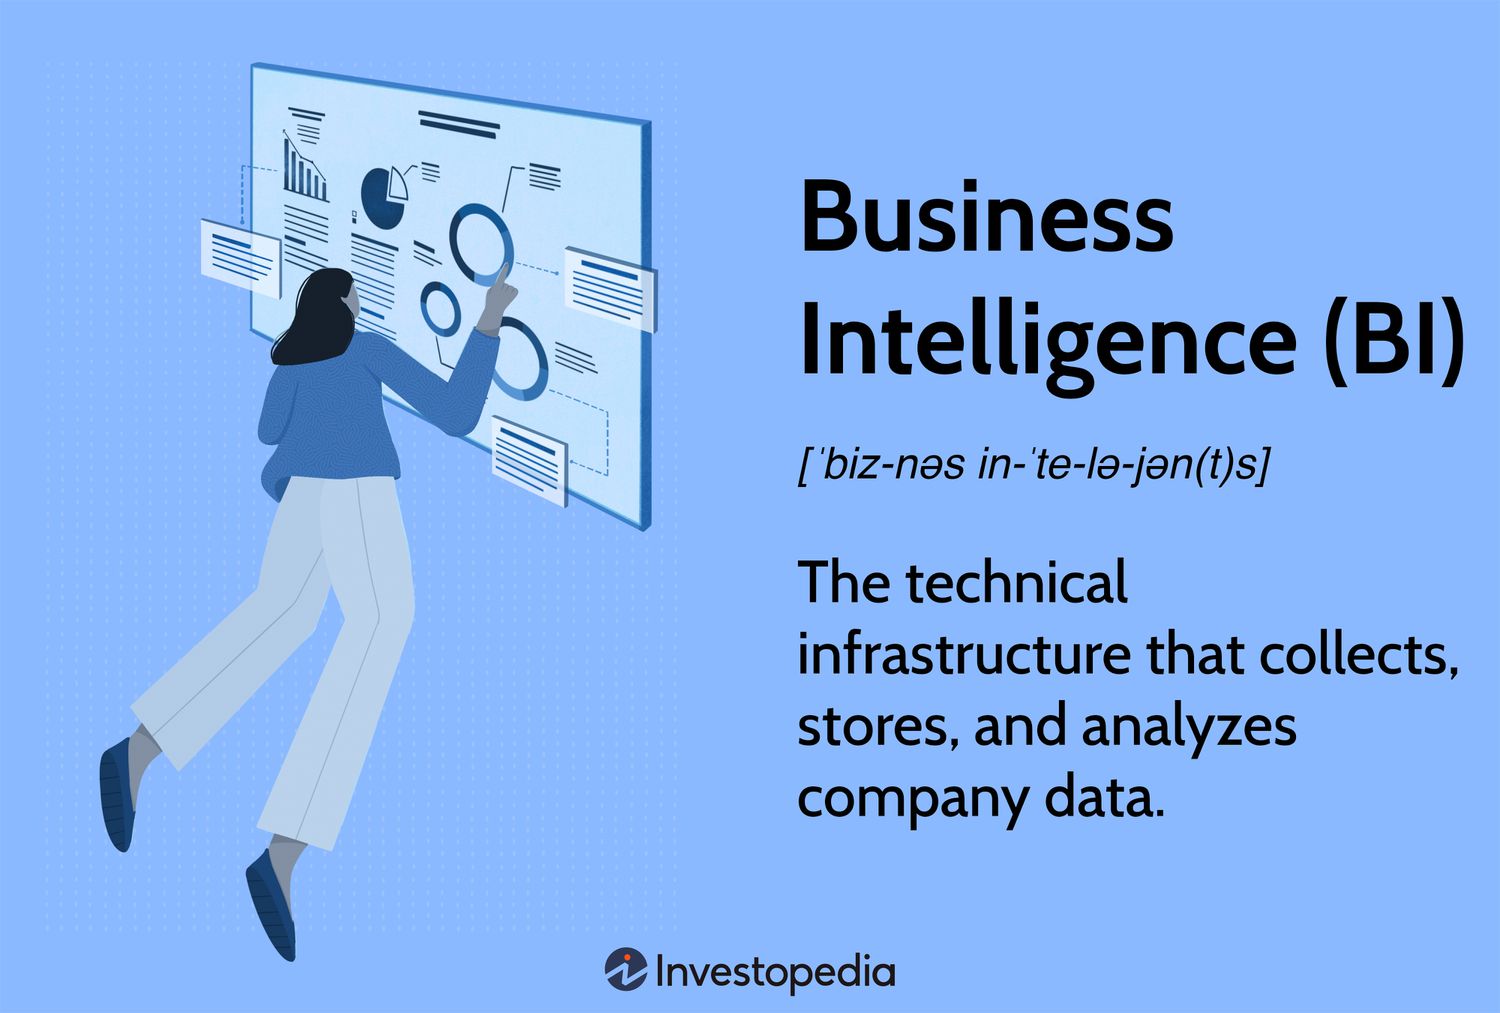 What are the Types of Business Intelligence Technologies?